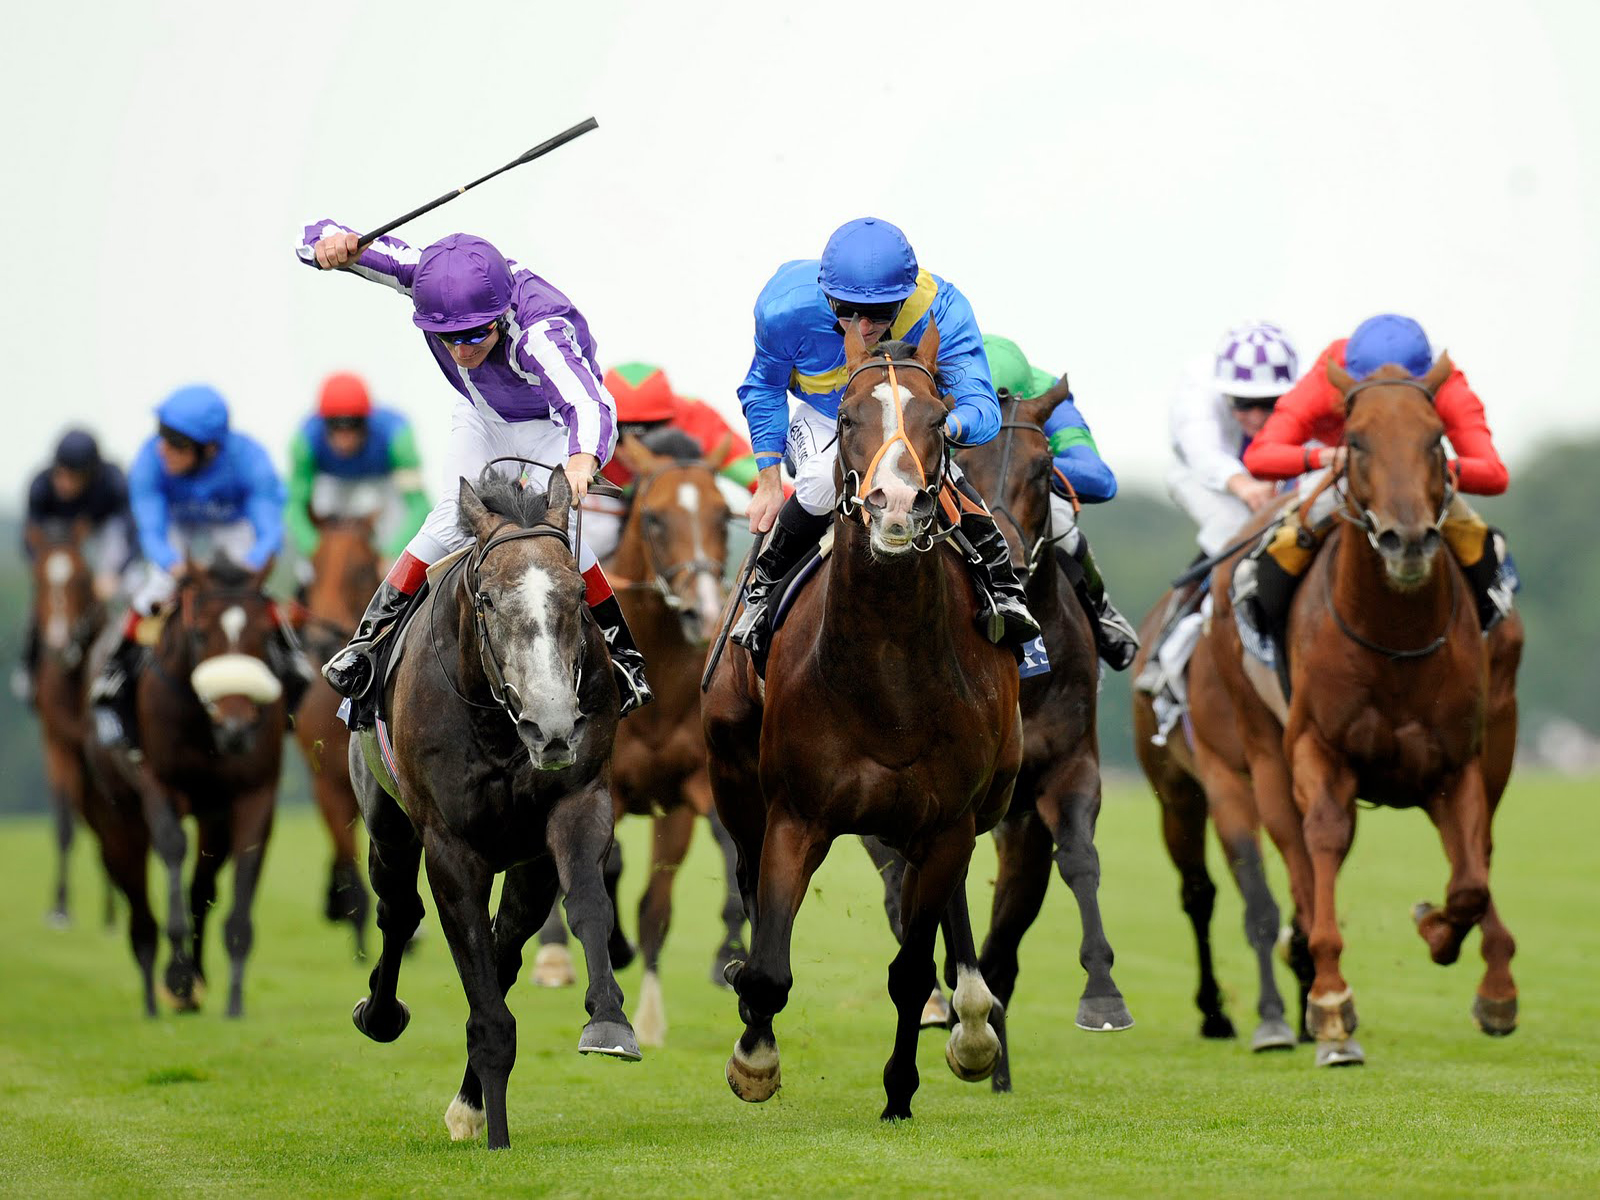 Download Horse Racing Wallpapers For Mobile Phone Free Horse Racing Hd Pictures